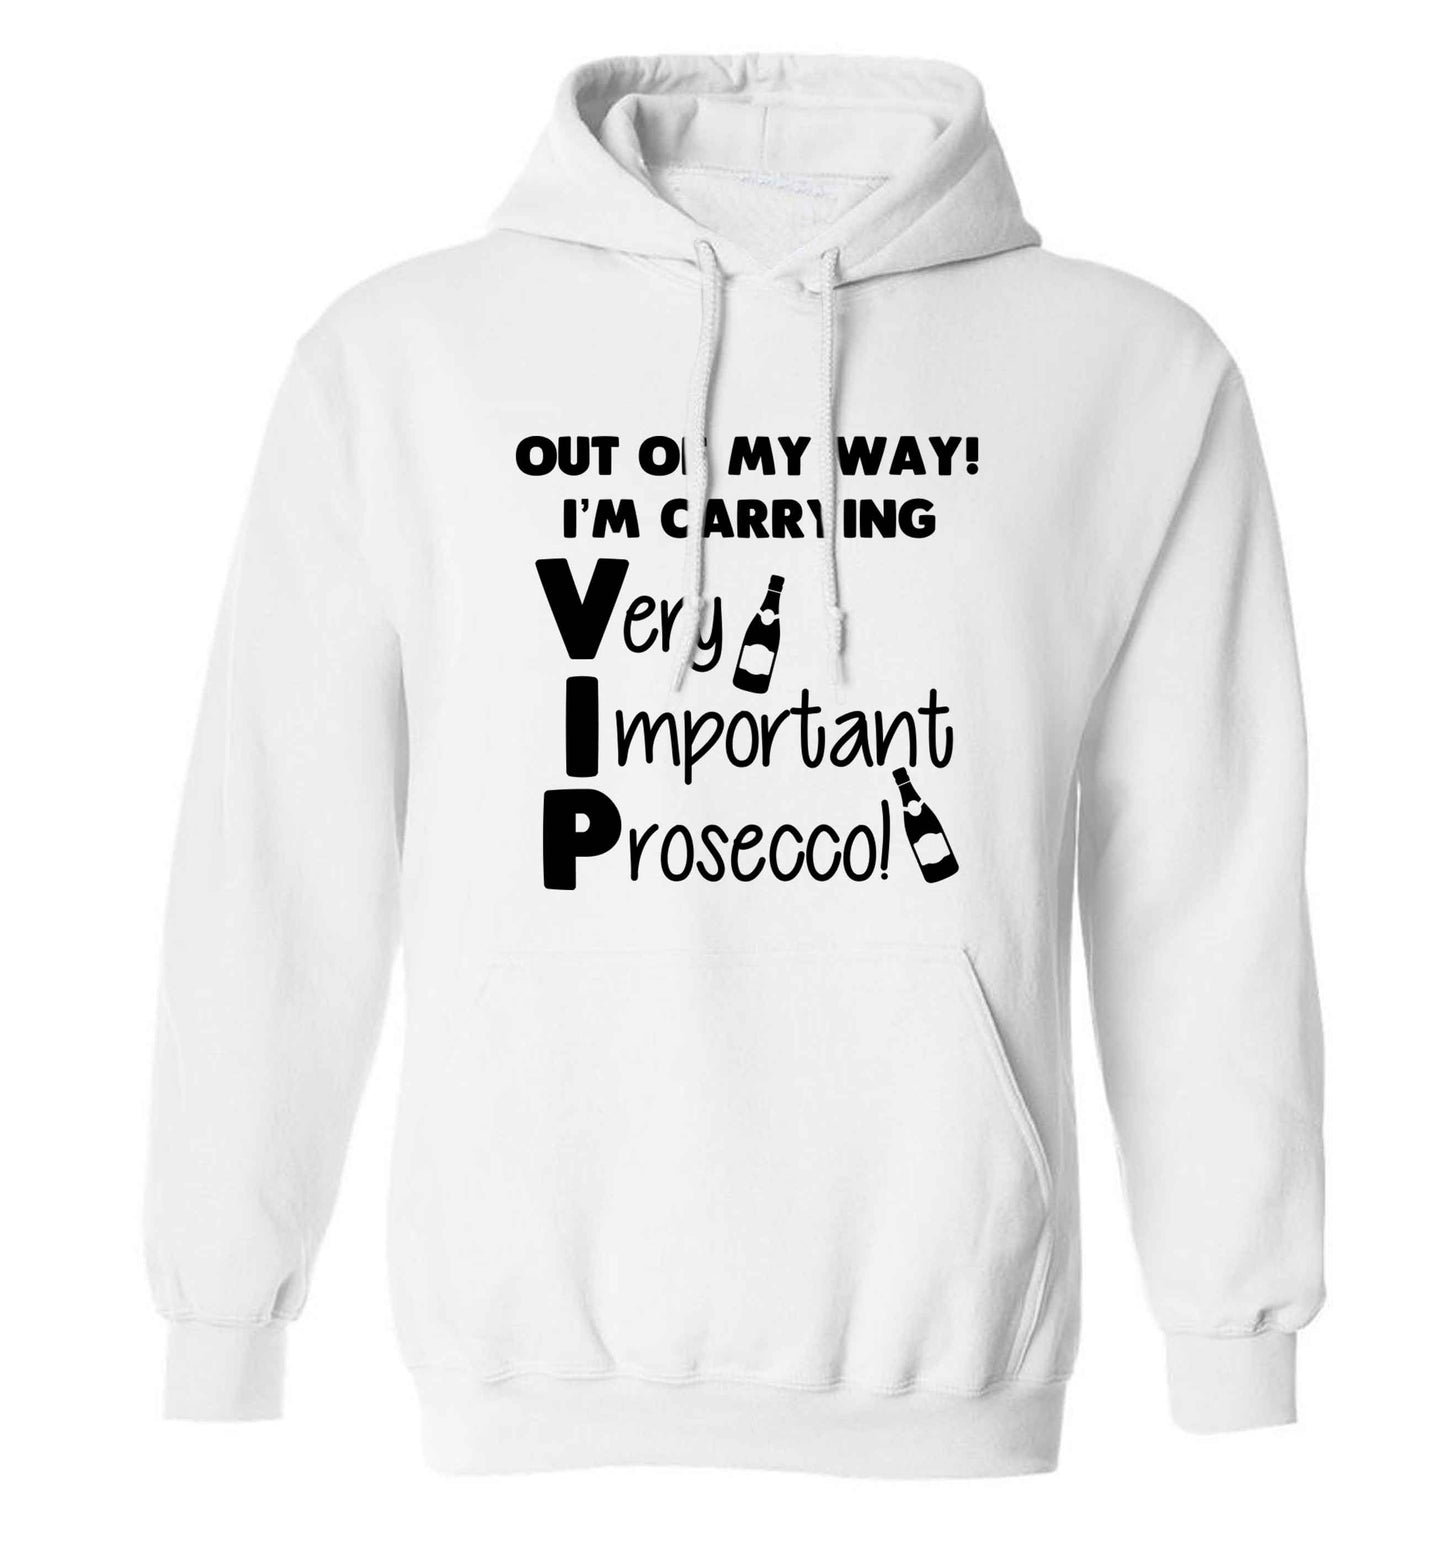 Out of my way I'm carrying very important prosecco! adults unisex white hoodie 2XL